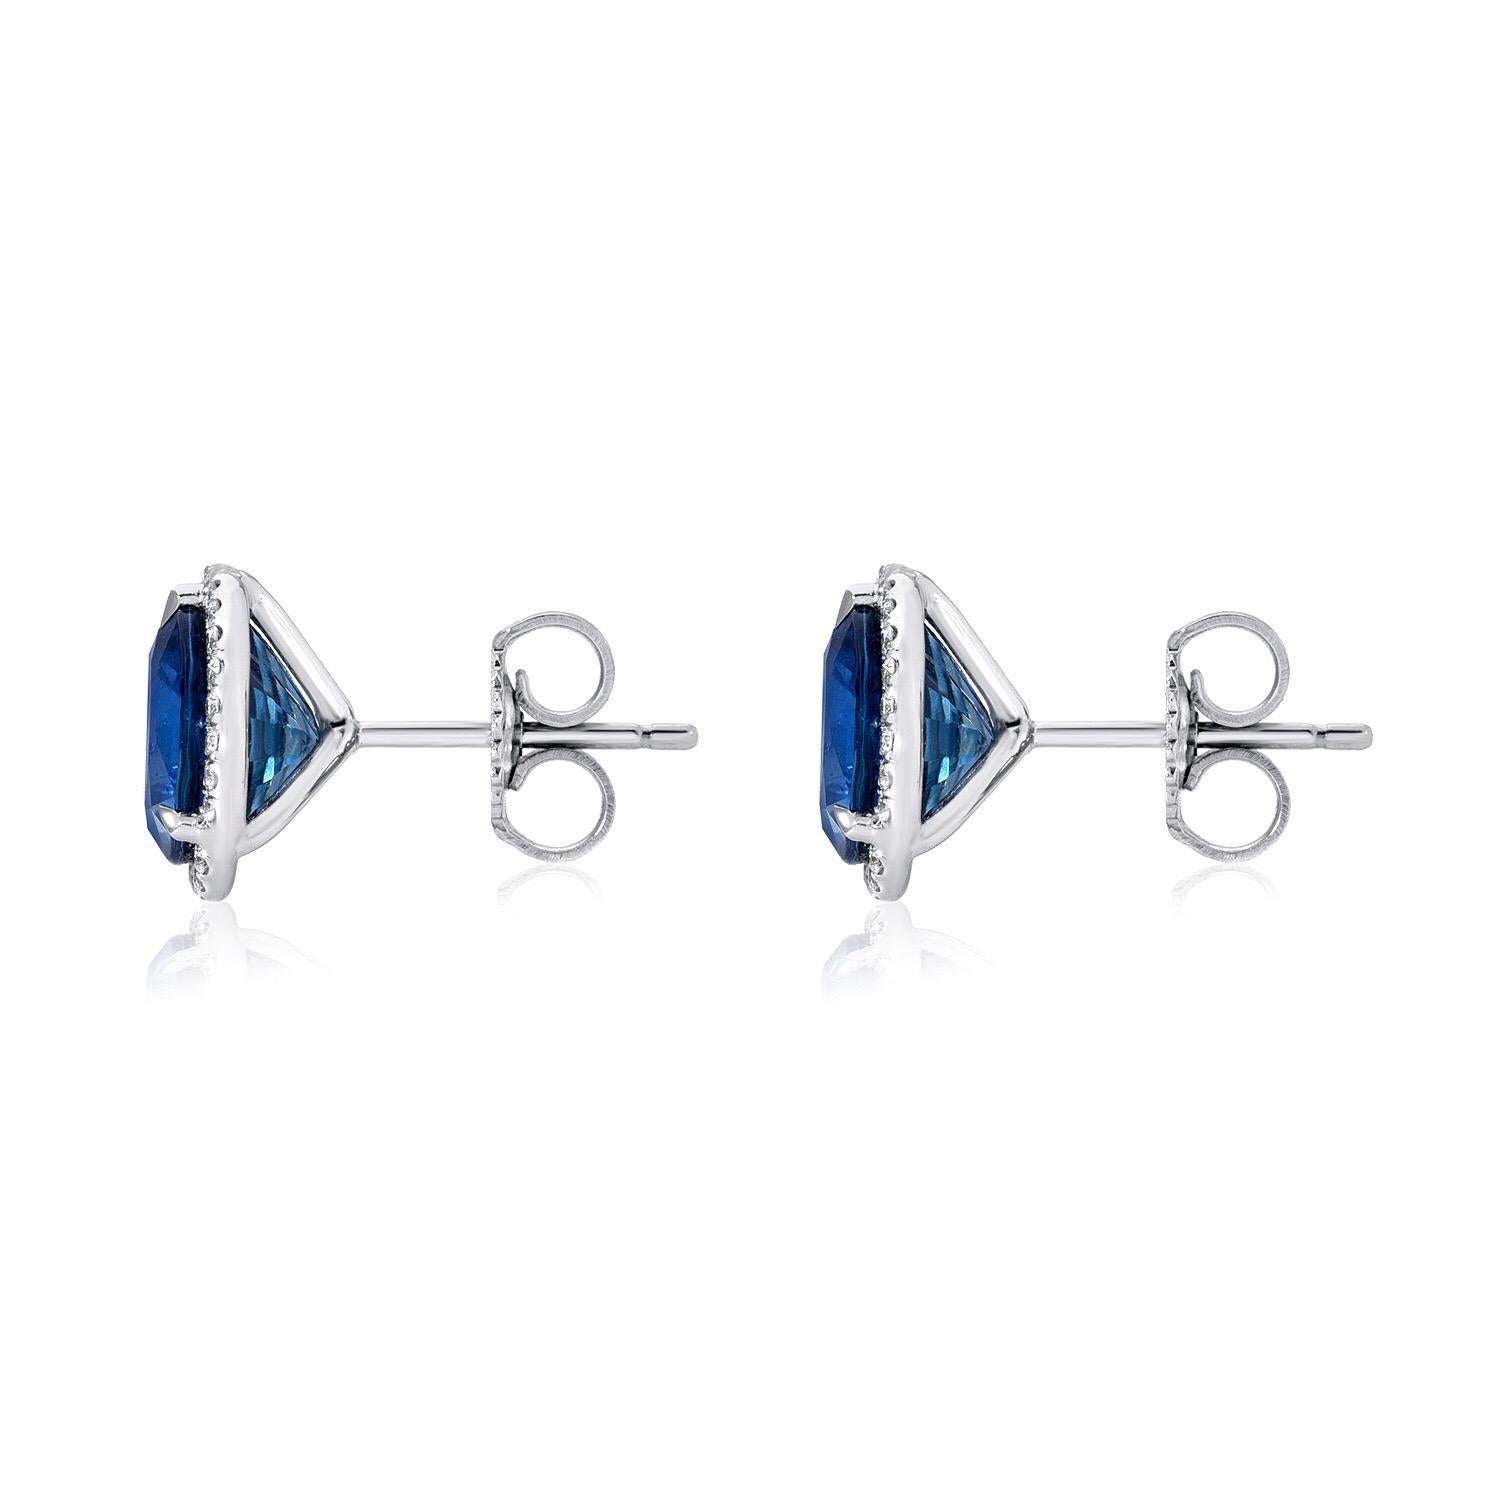 Sapphire stud earrings featuring a pair of round Sapphires weighing a total of 4.12 carats surrounded by a total of 0.20 carats of round brilliant diamonds, in 18K white gold.
Returns are accepted and paid by us within 7 days of delivery.

Sapphire